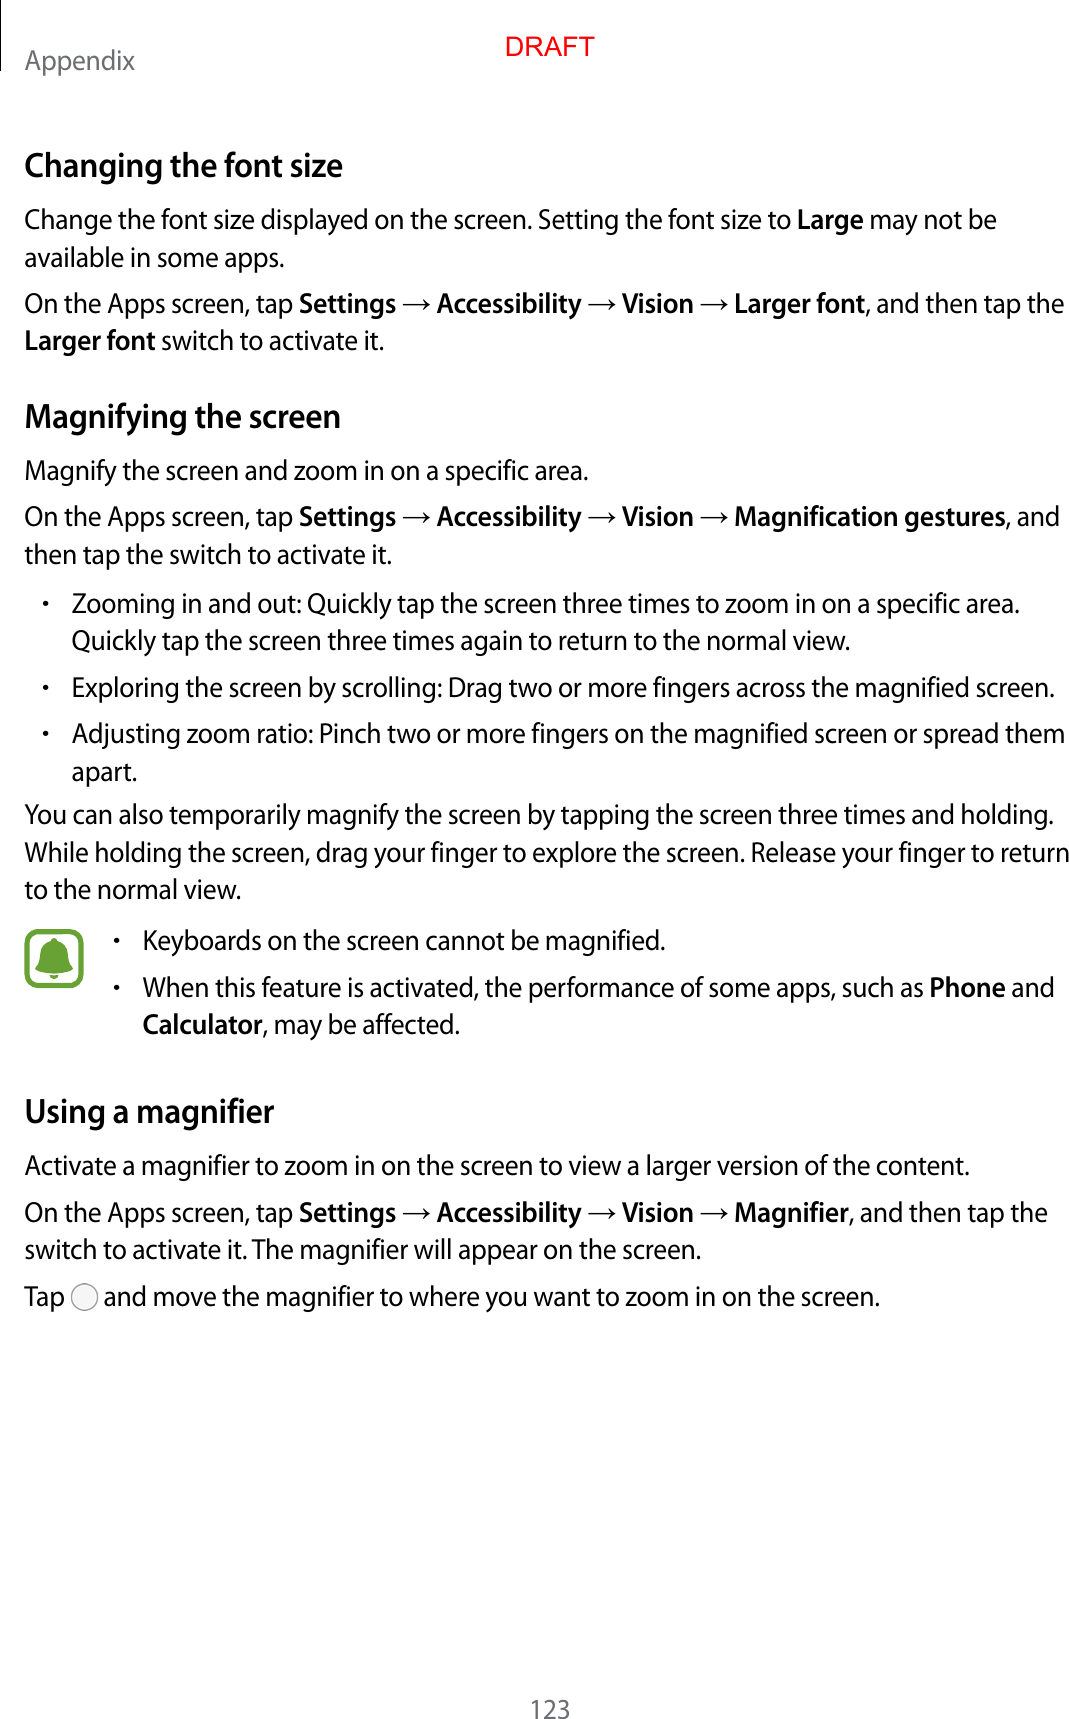 Appendix123Changing the font sizeChange the font size displayed on the screen. Setting the font size to Large may not be available in some apps.On the Apps screen, tap Settings  Accessibility  Vision  Larger font, and then tap the Larger font switch to activate it.Magnifying the screenMagnify the screen and zoom in on a specific area.On the Apps screen, tap Settings  Accessibility  Vision  Magnification gestures, and then tap the switch to activate it.•Zooming in and out: Quickly tap the screen three times to zoom in on a specific area.Quickly tap the screen three times again to return to the normal view.•Exploring the screen by scrolling: Drag two or more fingers across the magnified screen.•Adjusting zoom ratio: Pinch two or more fingers on the magnified screen or spread themapart.You can also temporarily magnify the screen by tapping the screen three times and holding. While holding the screen, drag your finger to explore the screen. Release your finger to return to the normal view.•Keyboards on the screen cannot be magnified.•When this feature is activated, the performance of some apps, such as Phone andCalculator, may be affected.Using a magnifierActivate a magnifier to zoom in on the screen to view a larger version of the content.On the Apps screen, tap Settings  Accessibility  Vision  Magnifier, and then tap the switch to activate it. The magnifier will appear on the screen.Tap   and move the magnifier to where you want to zoom in on the screen.DRAFT